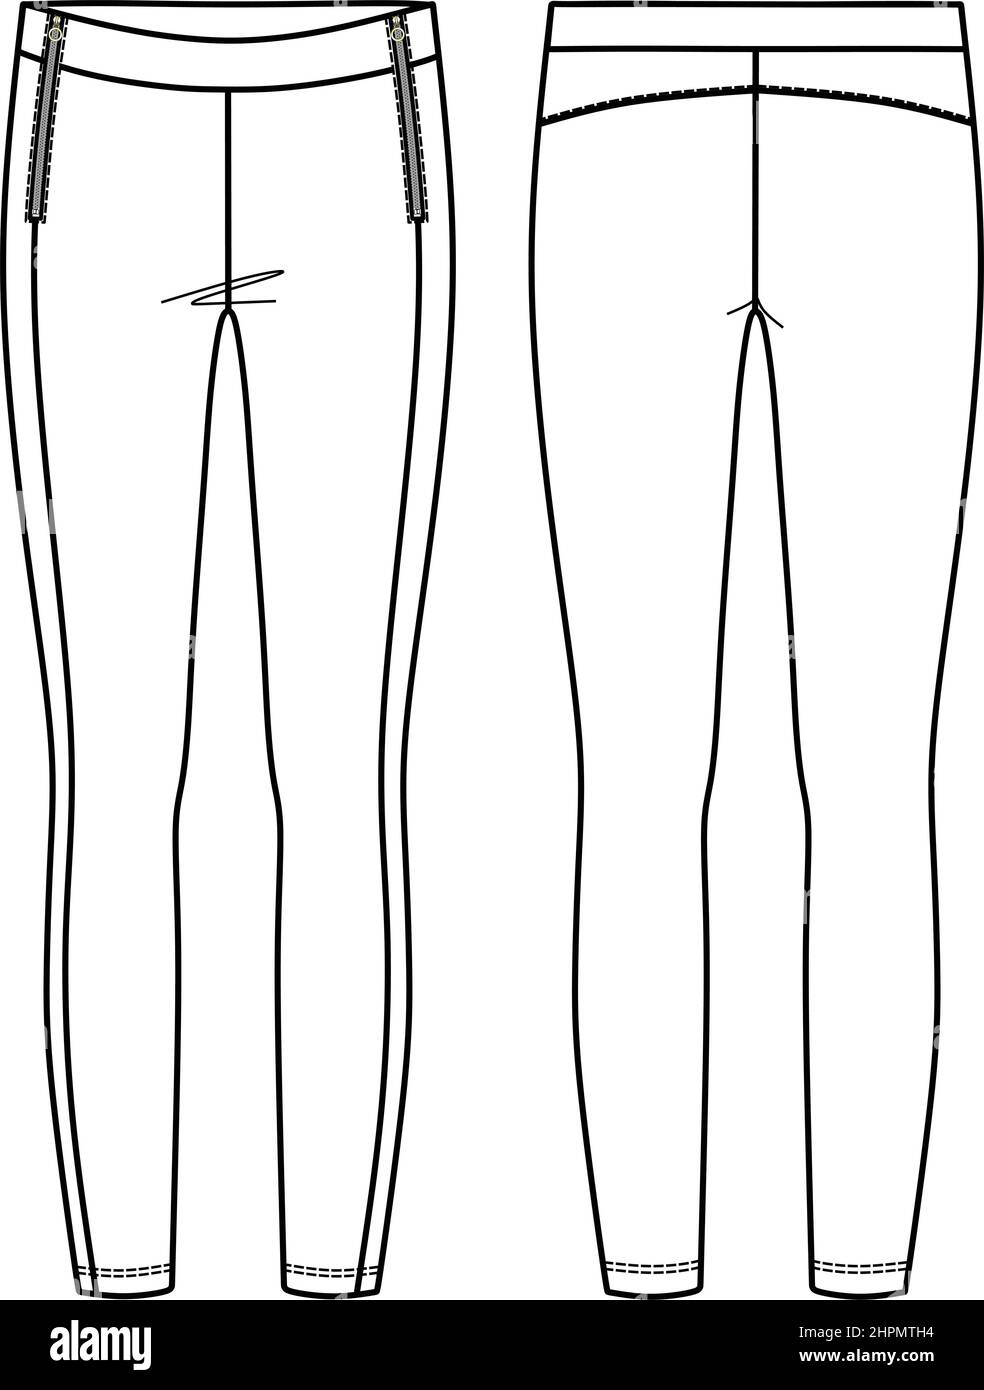 https://c8.alamy.com/comp/2HPMTH4/vector-sport-leggings-fashion-cad-woman-lounge-or-yoga-leggings-with-high-waist-technical-drawing-legging-fashion-flat-with-zip-detail-sketch-temp-2HPMTH4.jpg